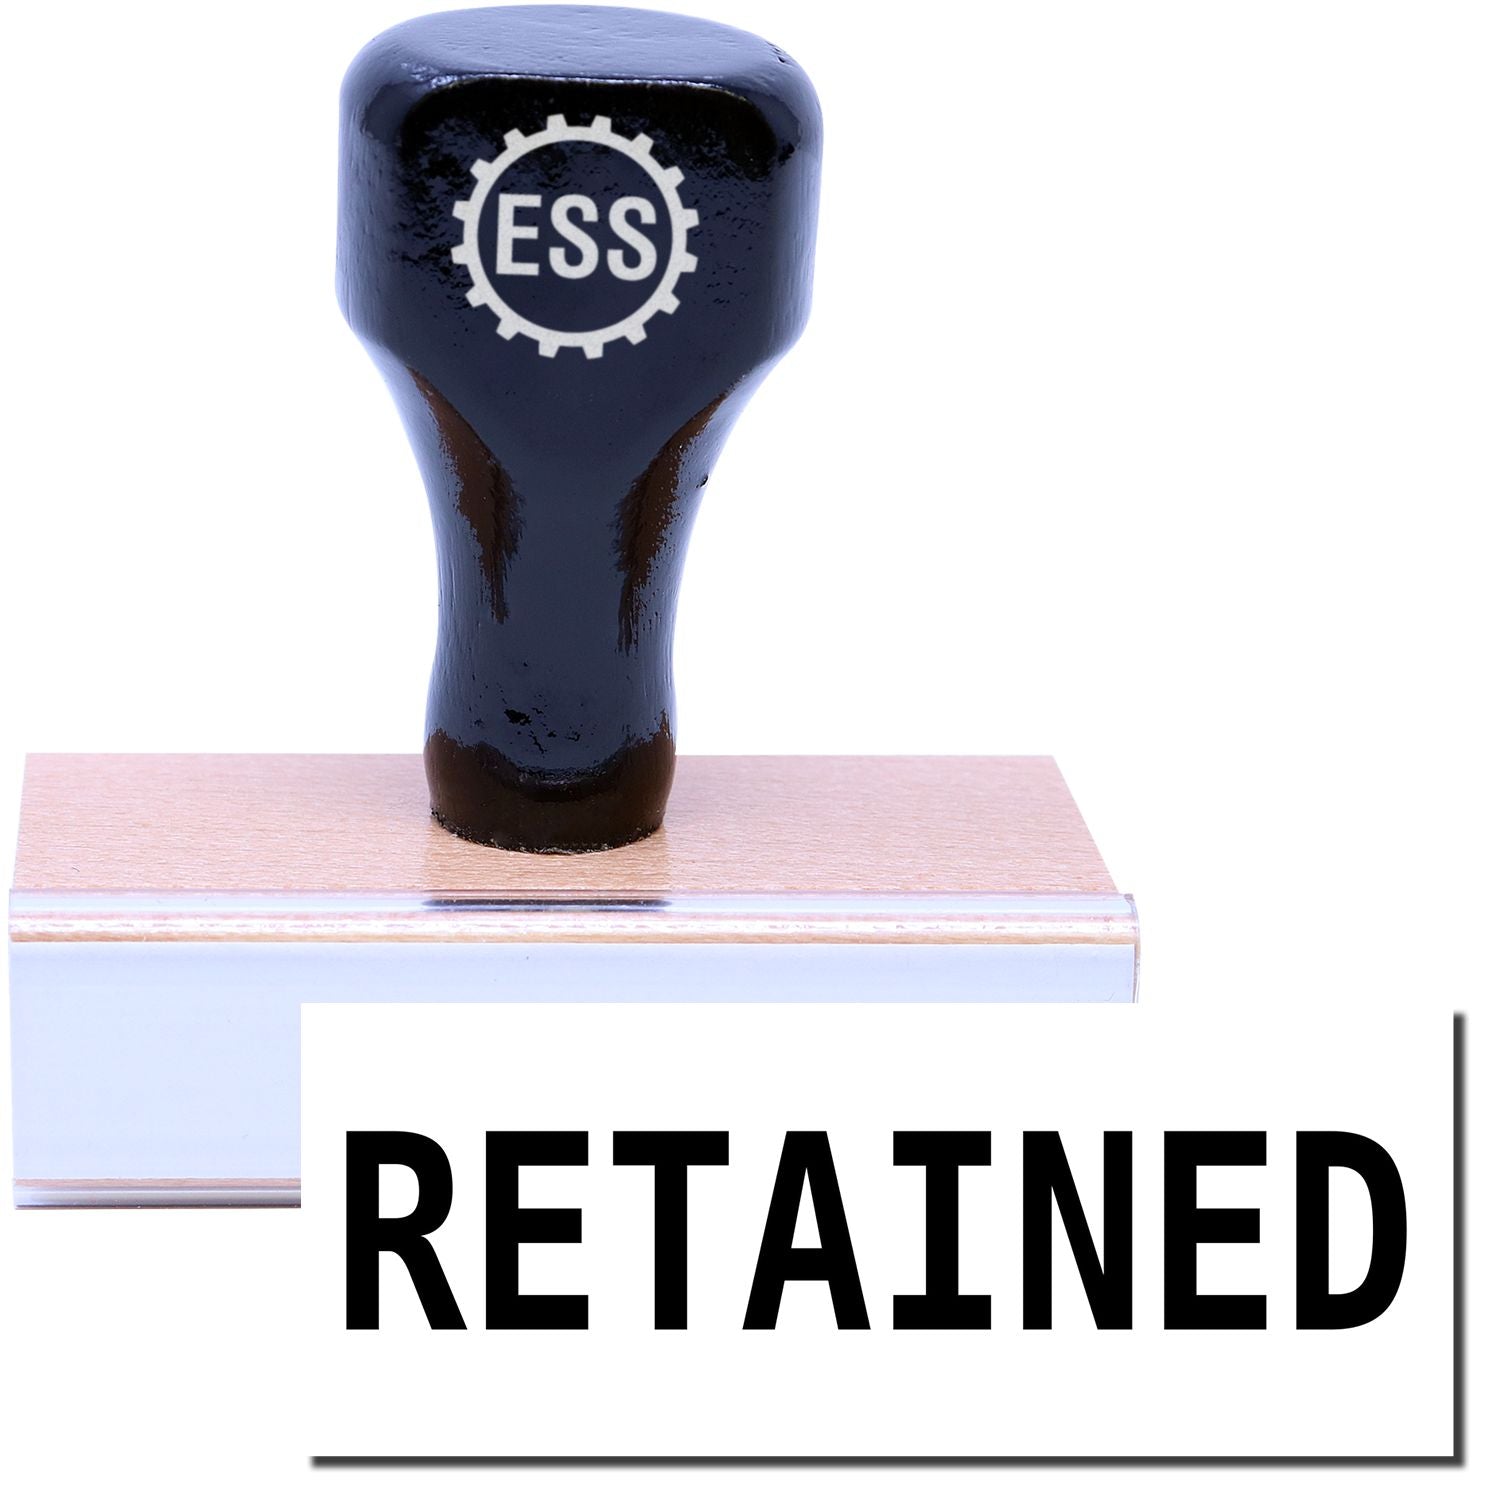 A stock office rubber stamp with a stamped image showing how the text "RETAINED" is displayed after stamping.